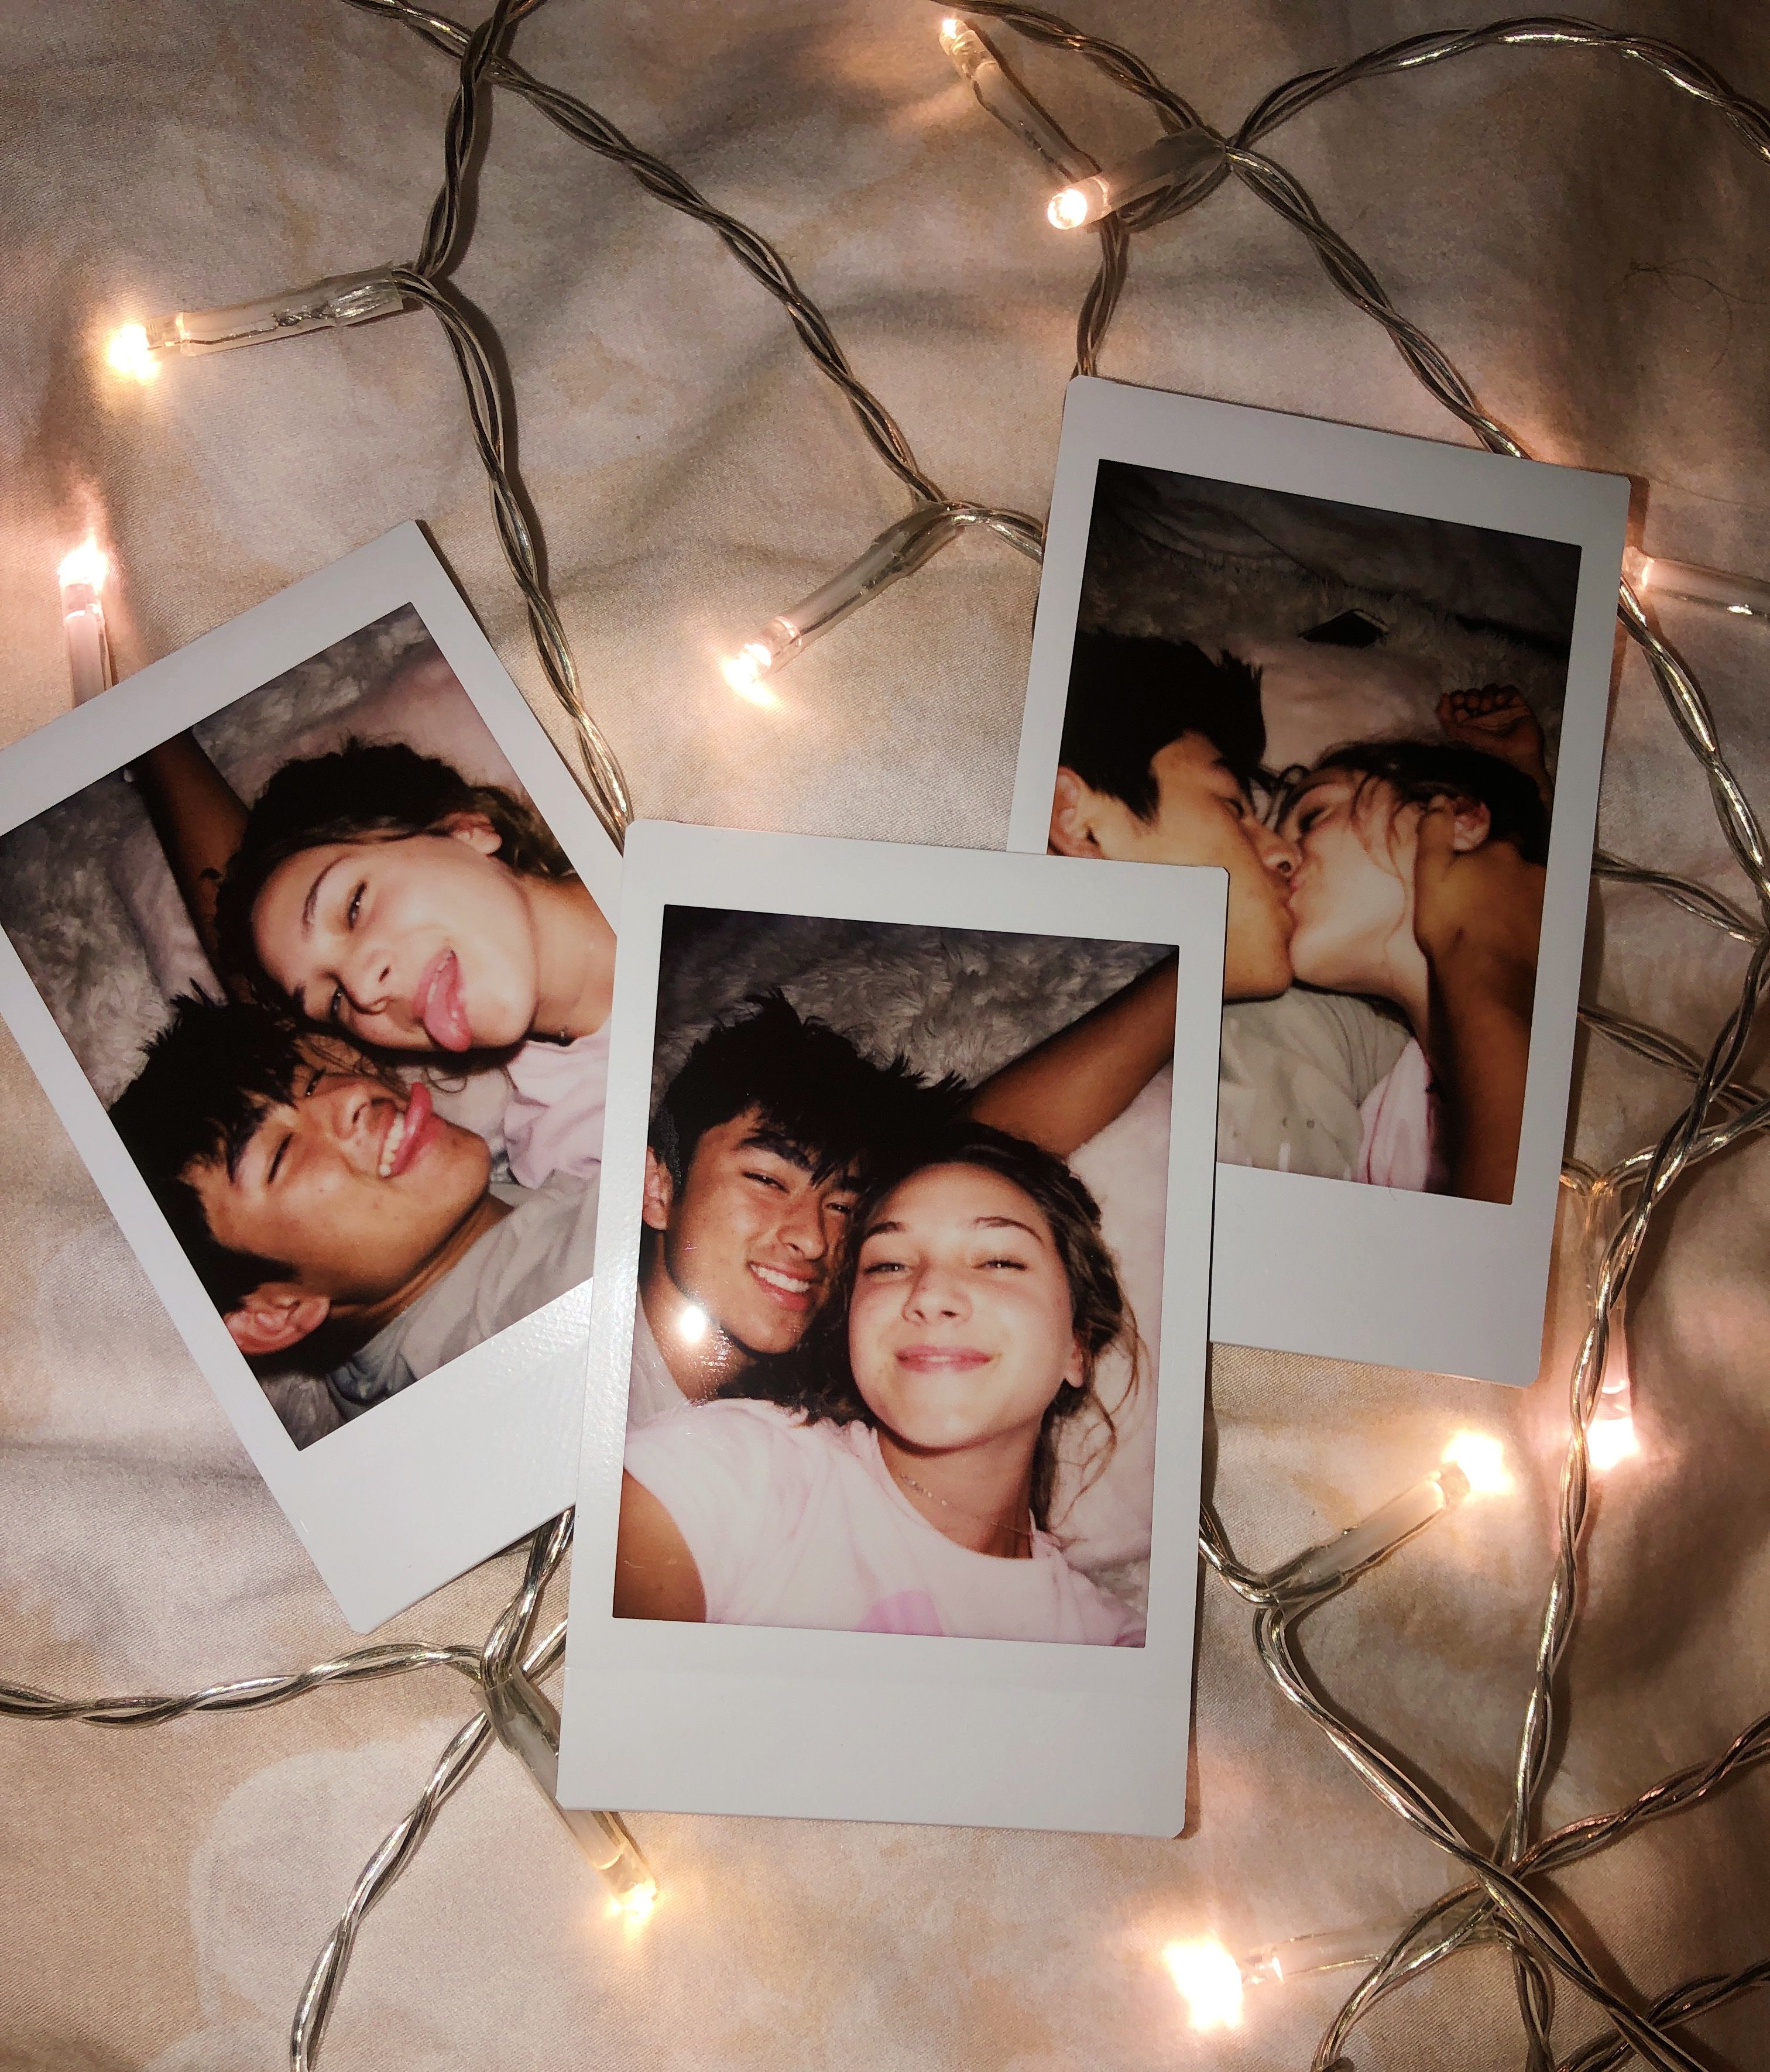 amber friel recommends cute couple polaroid pictures pic